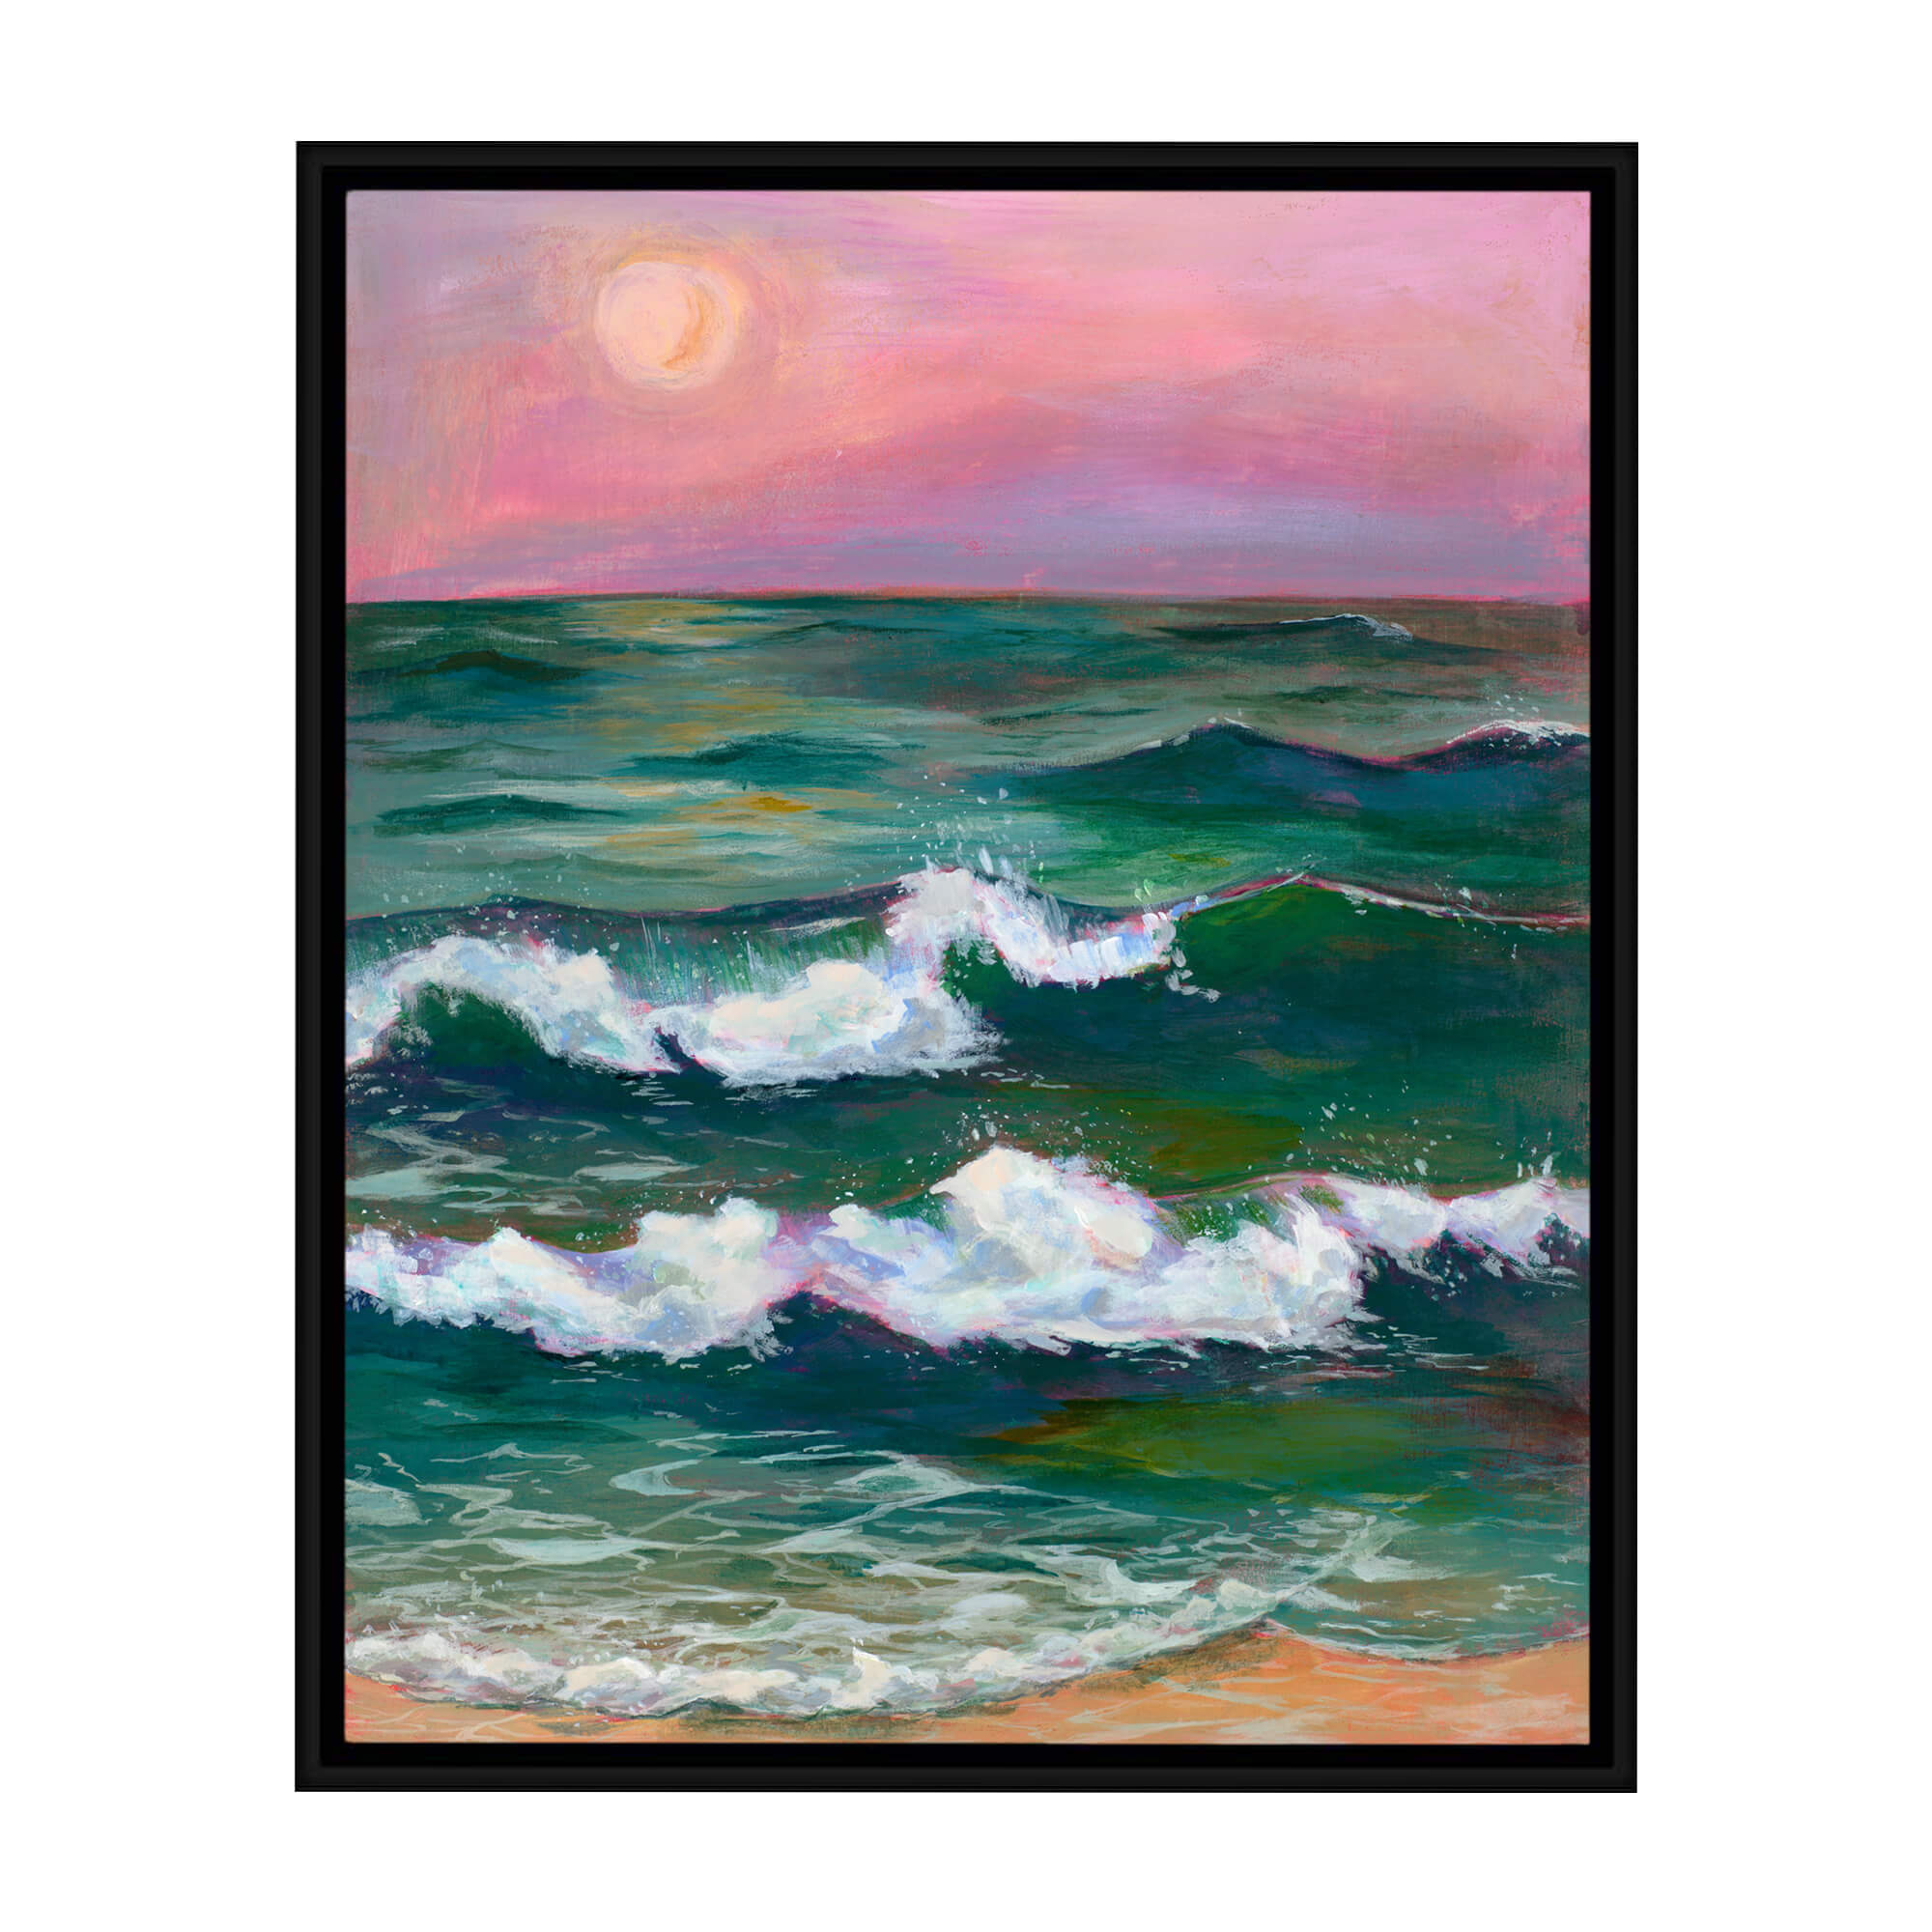 A seascape with pink hued sky by Hawaii artist Lindsay Wilkins